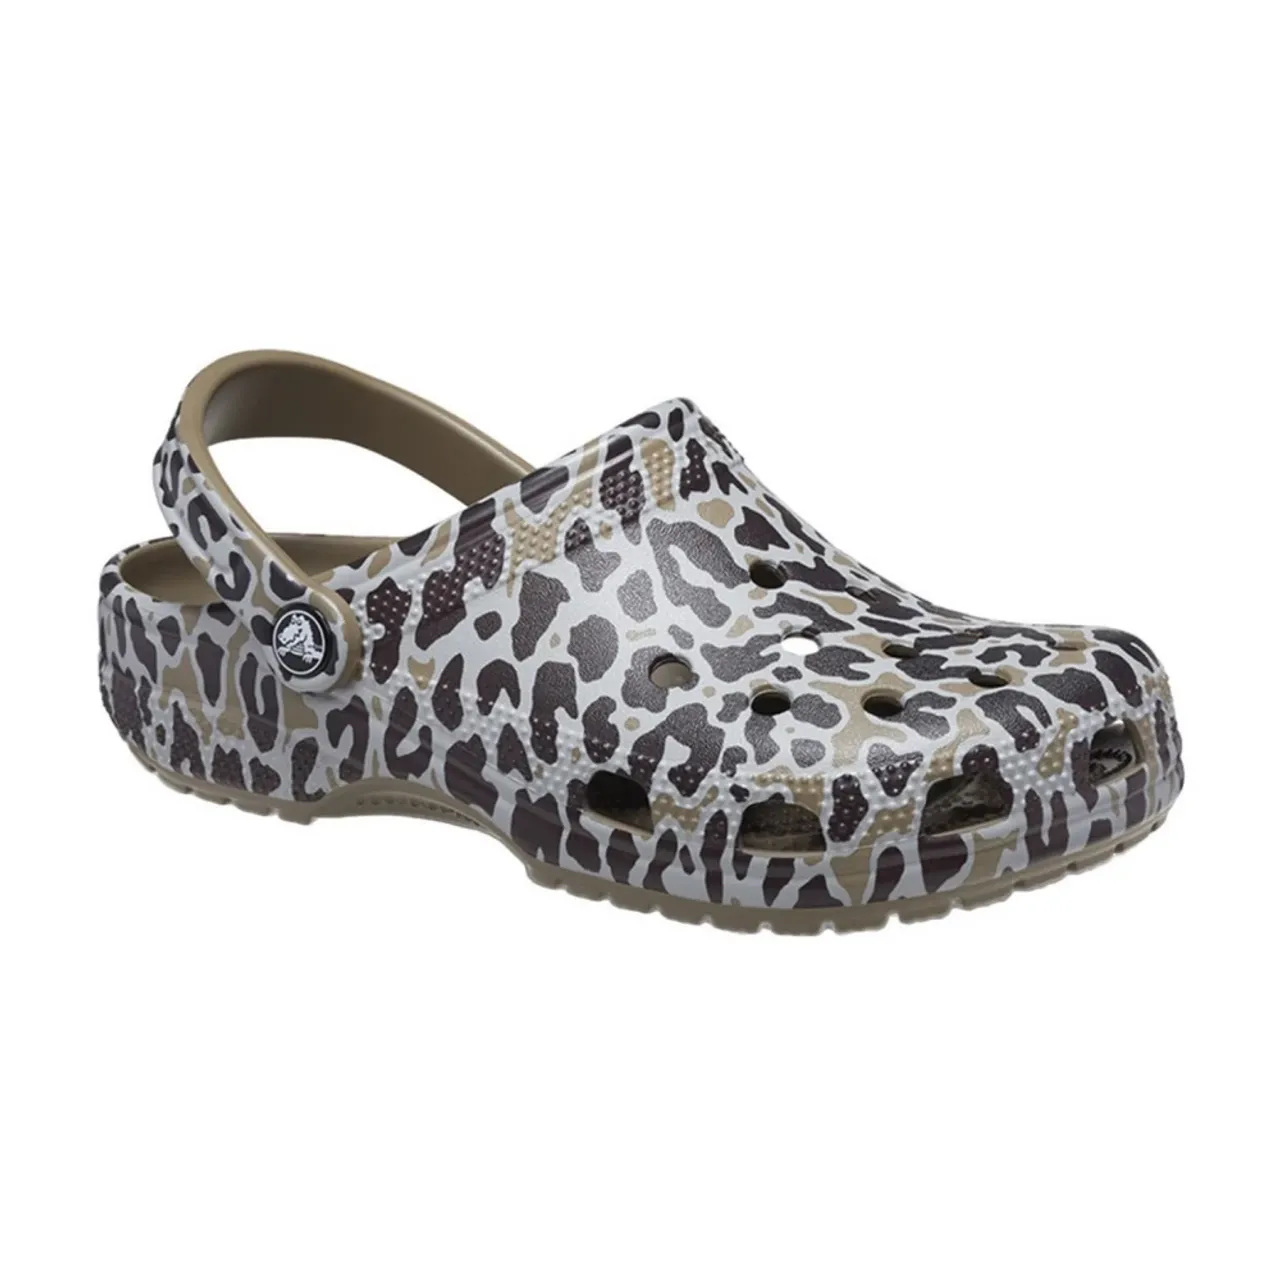 Crocs , Cr.206676-2By Sandals With Wedges ,Gray female, Sizes: